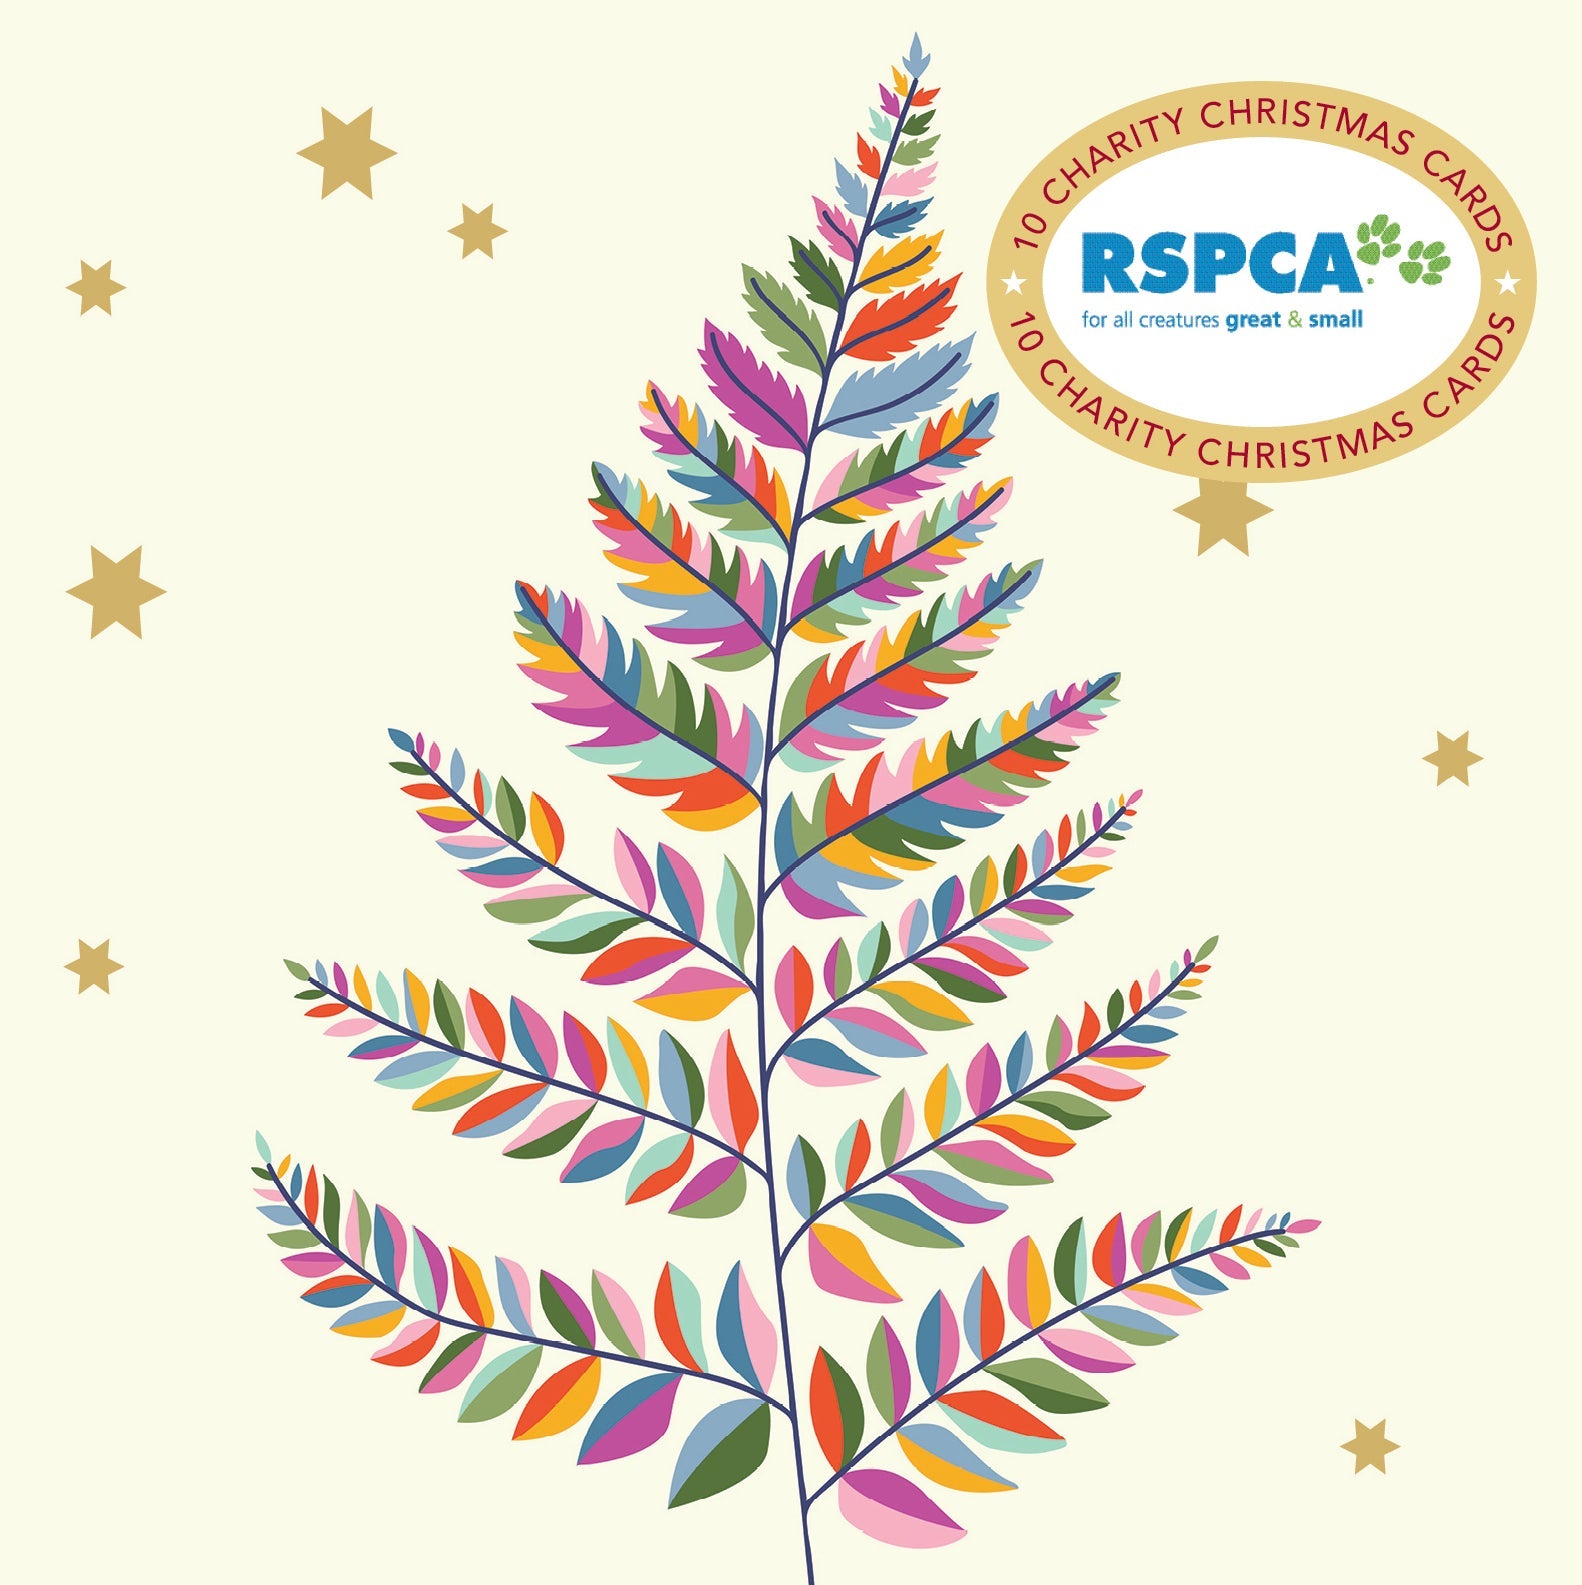 RSPCA Colourful Tree - 10 Charity Christmas Cards Pack